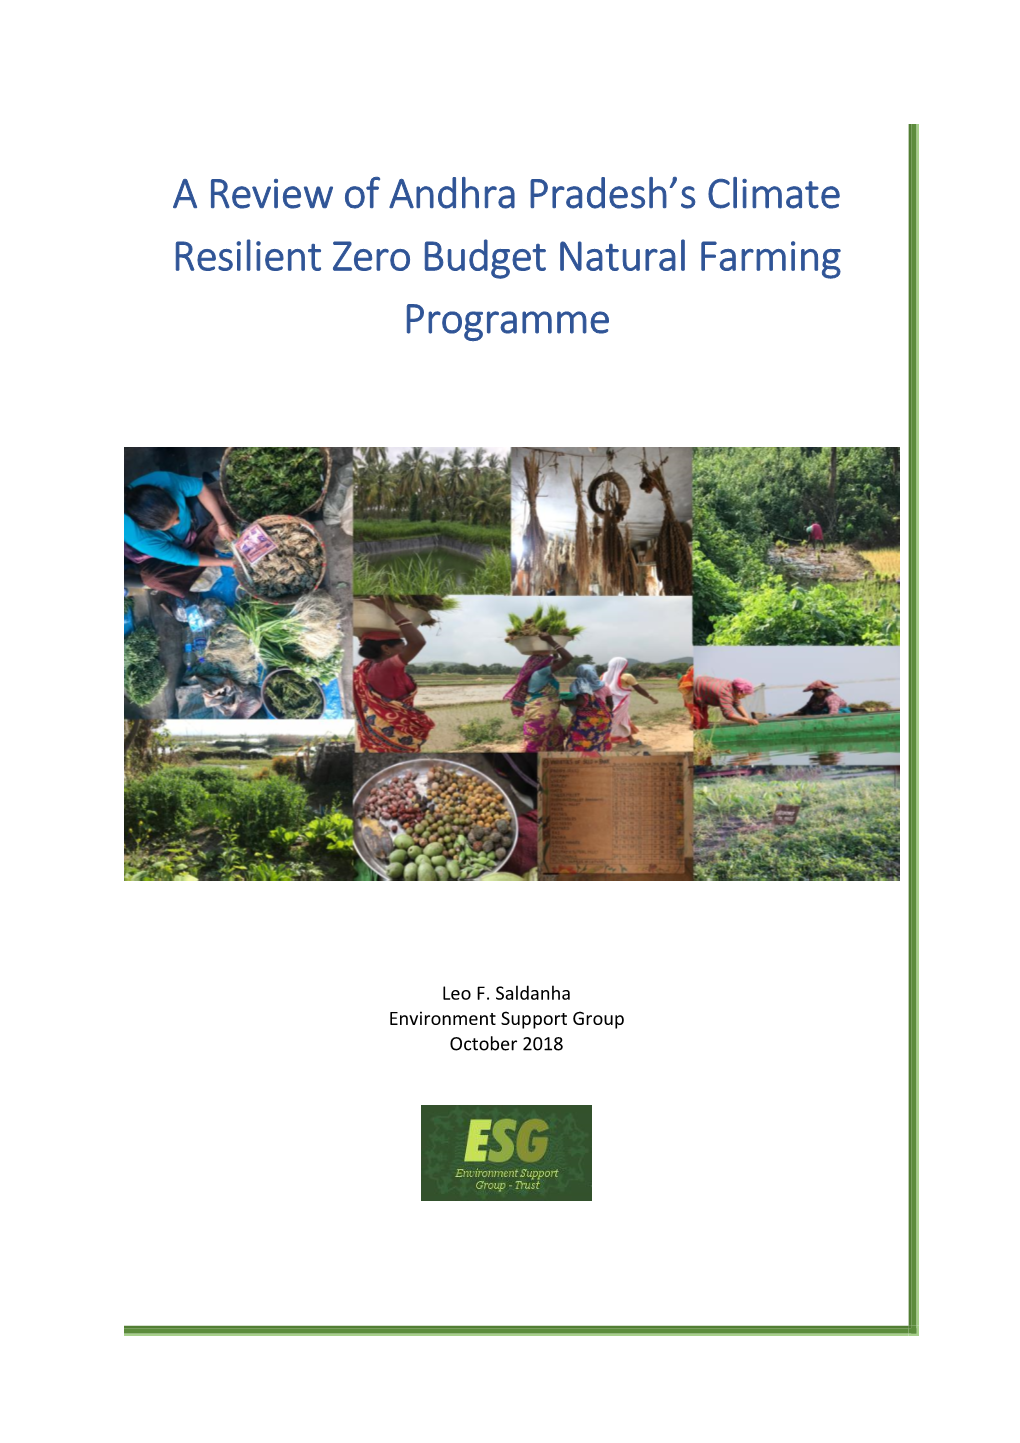 A Review of Andhra Pradesh's Climate Resilient Zero Budget